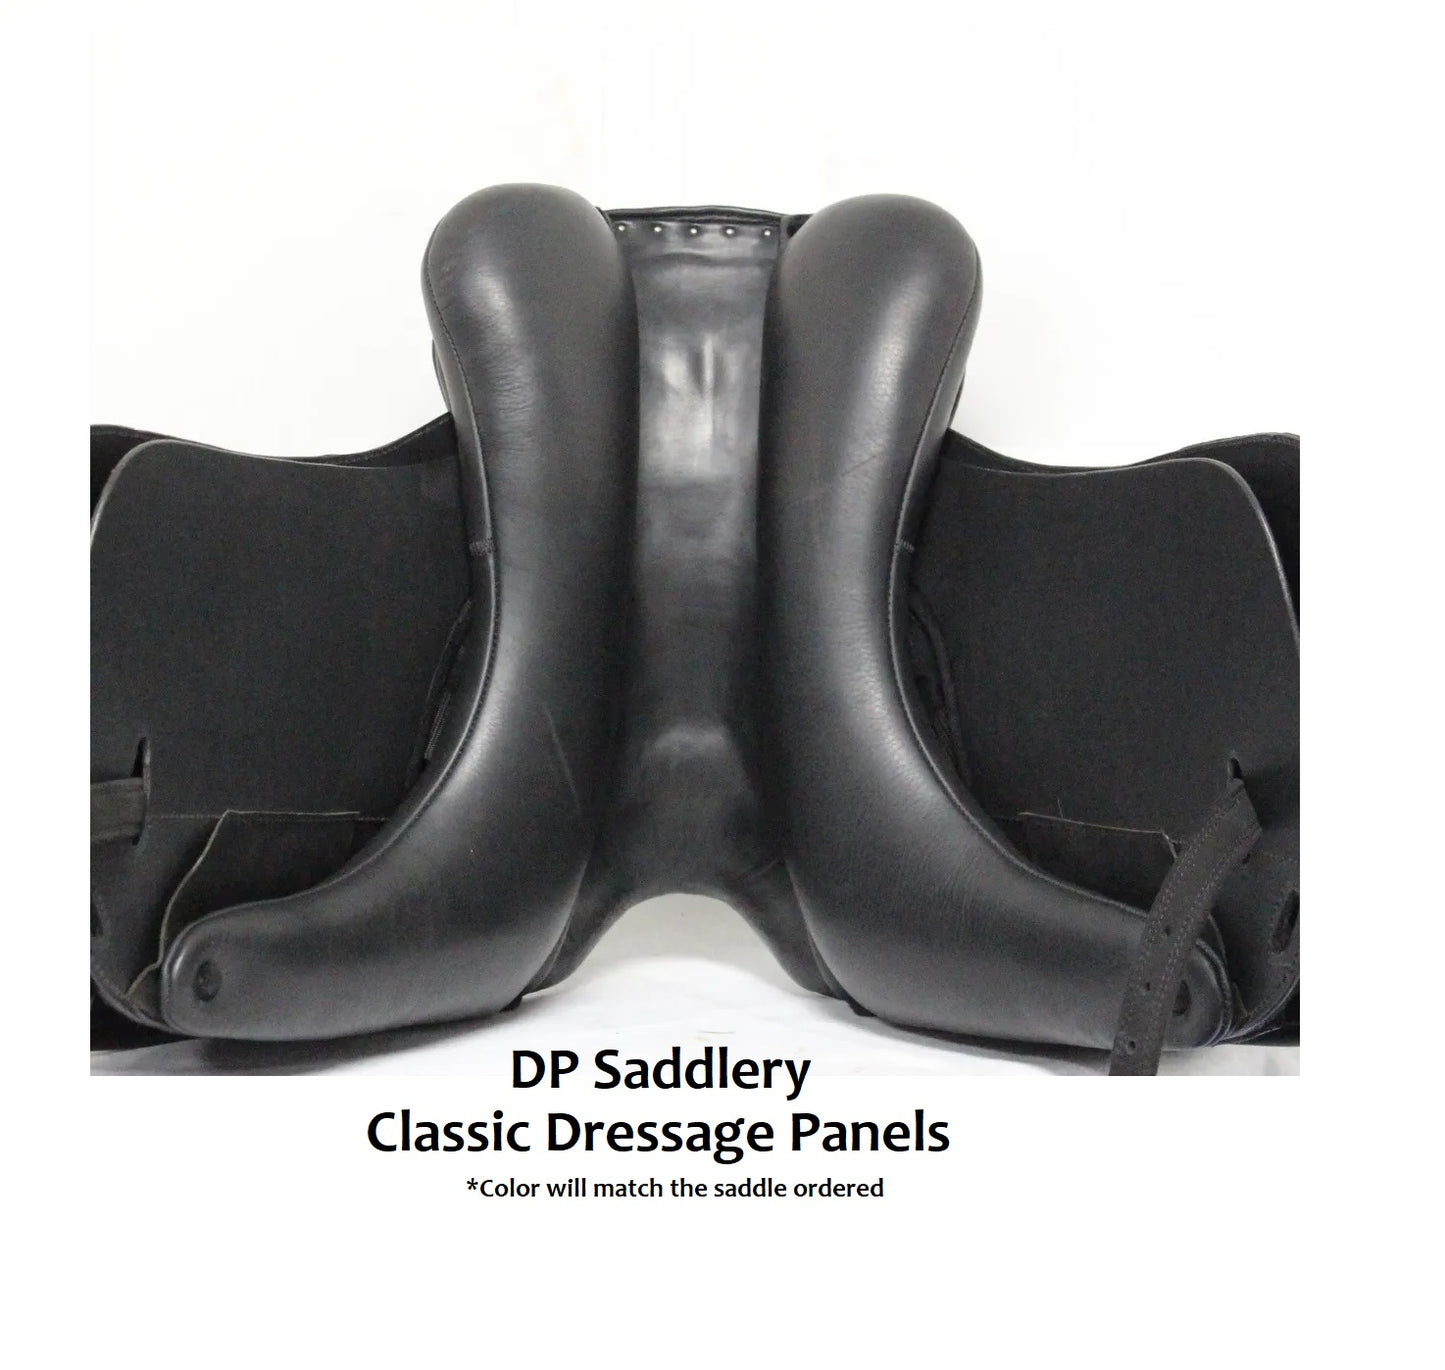 DP Saddlery Classic Dressage 6454 18 in